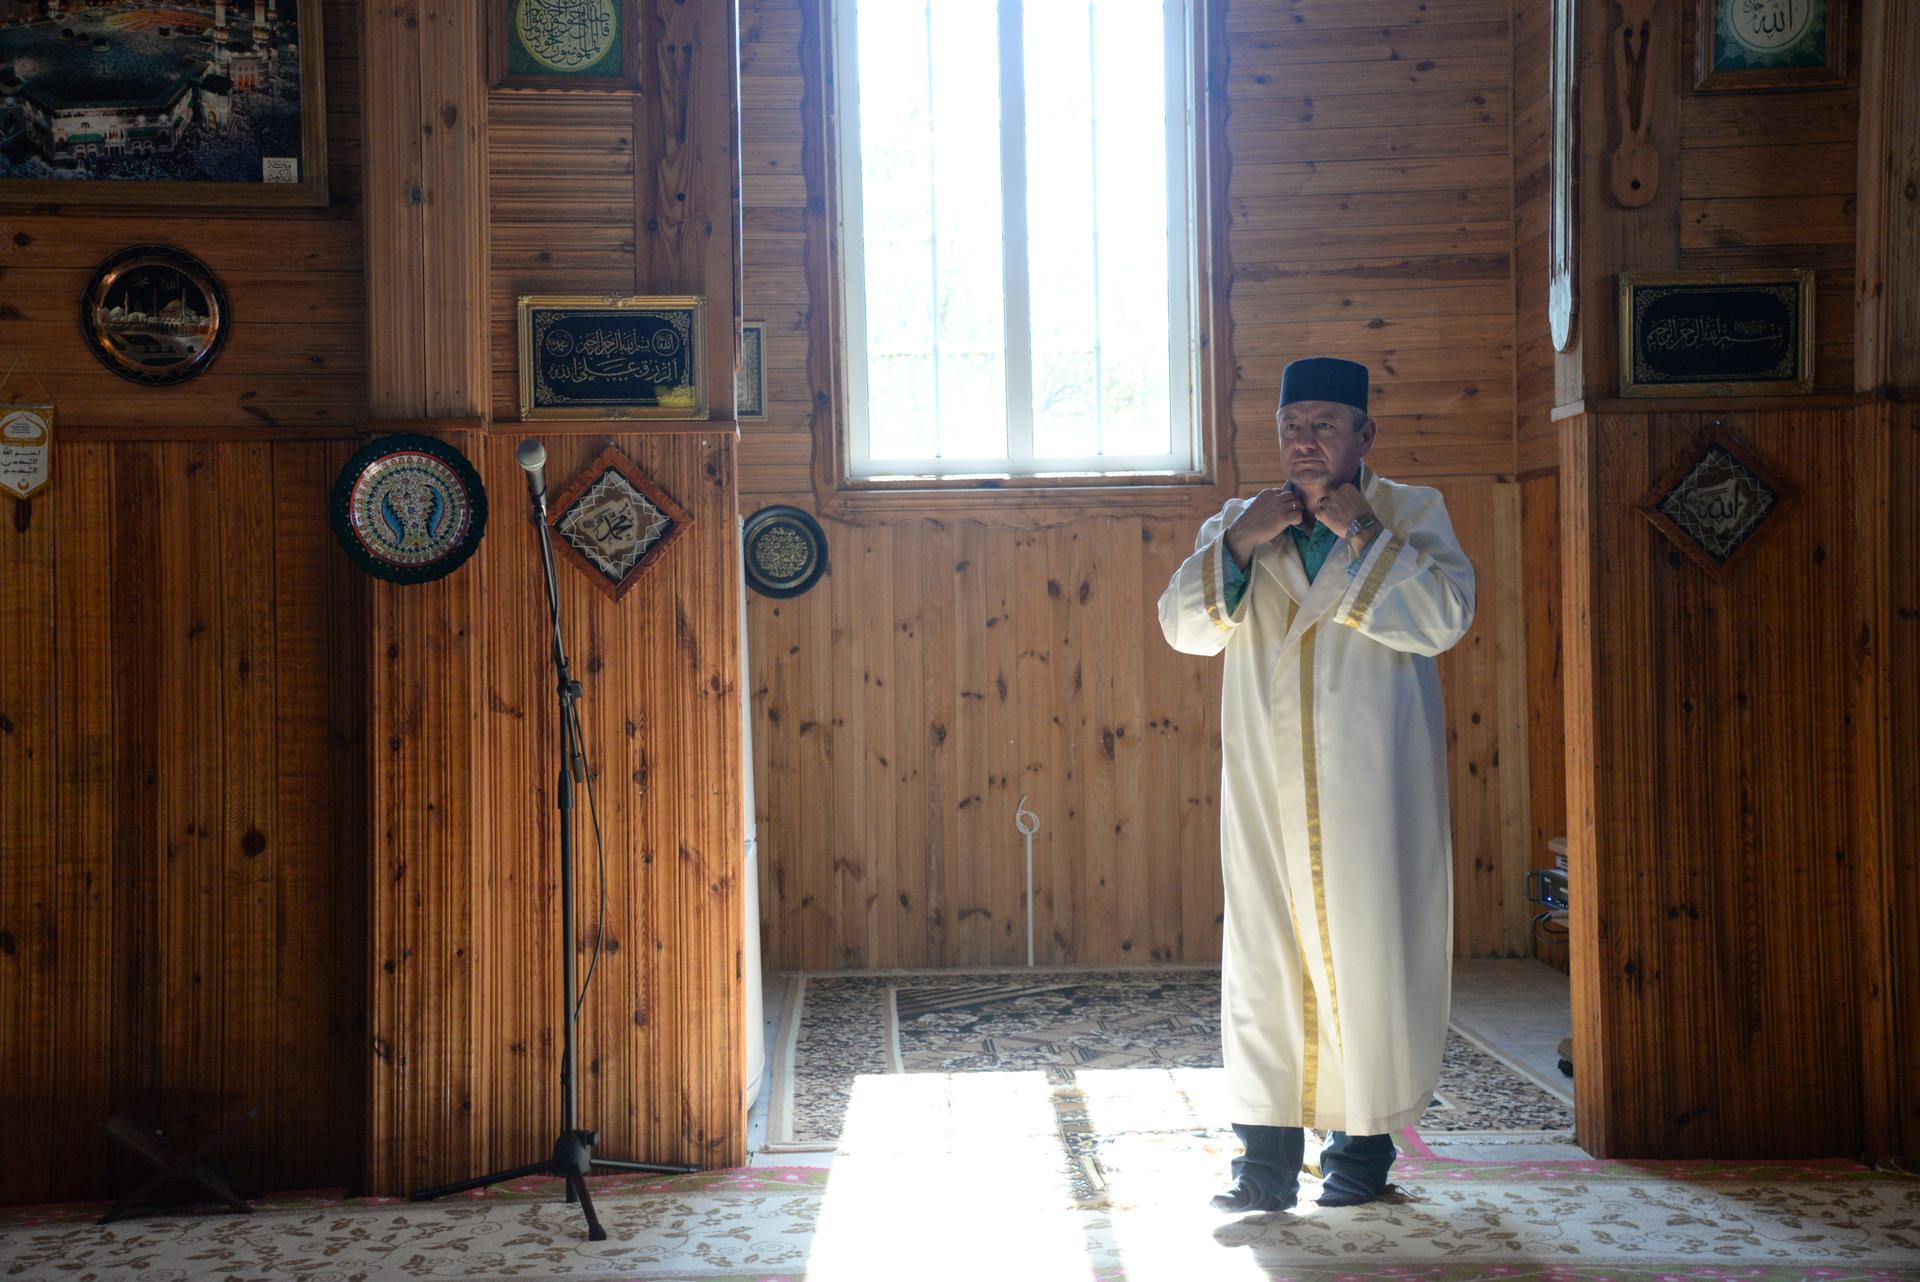 Man in mosque wearing robe